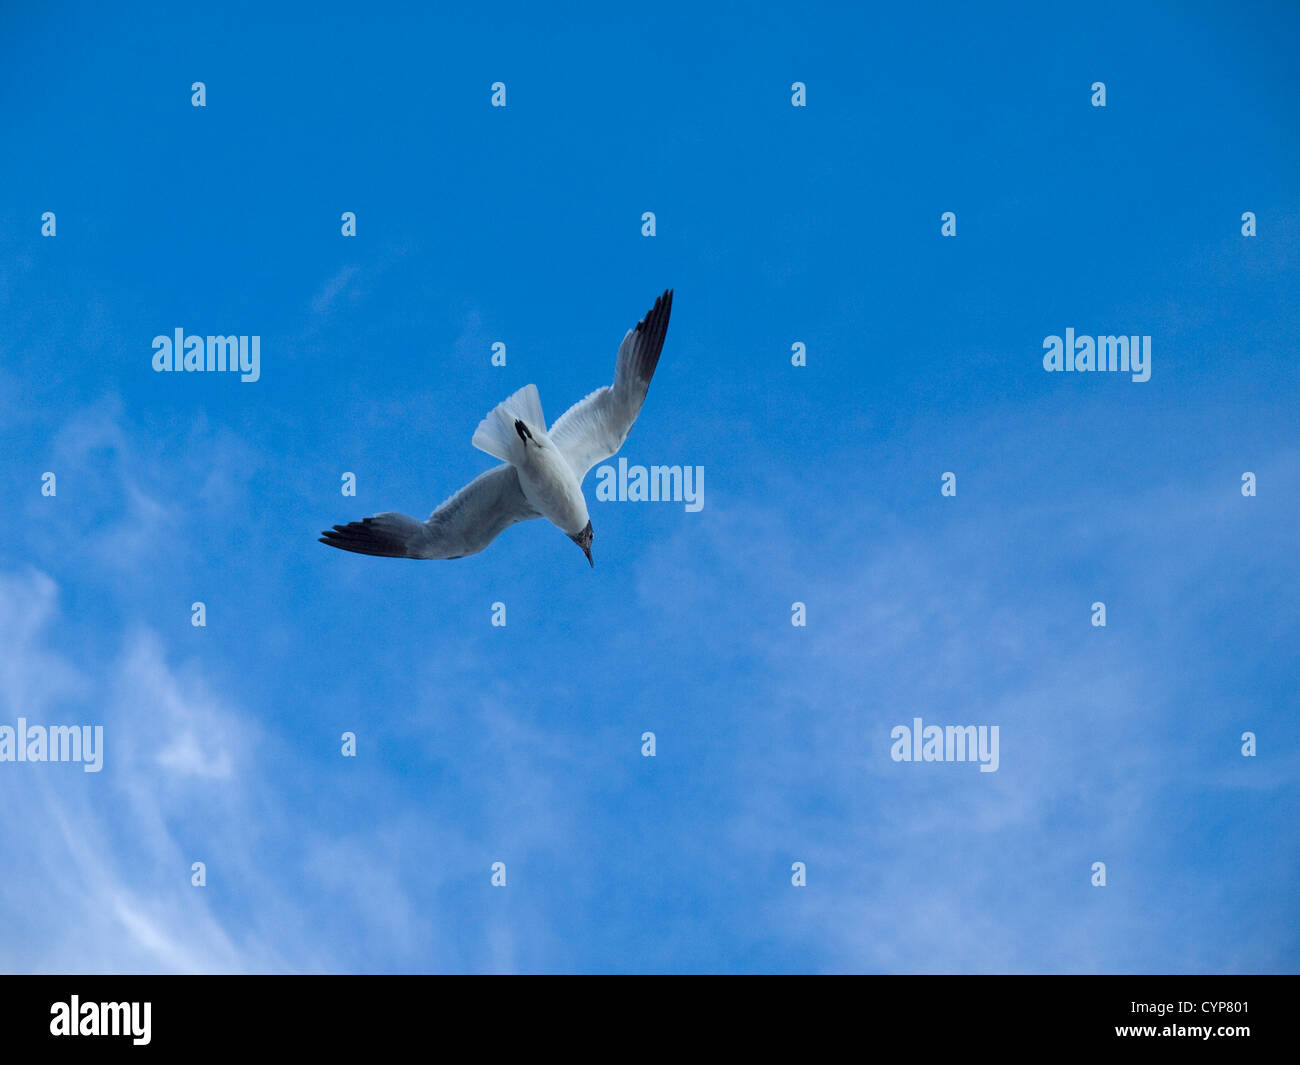 Seabird flying with widespread wings against blue sky. Stock Photo